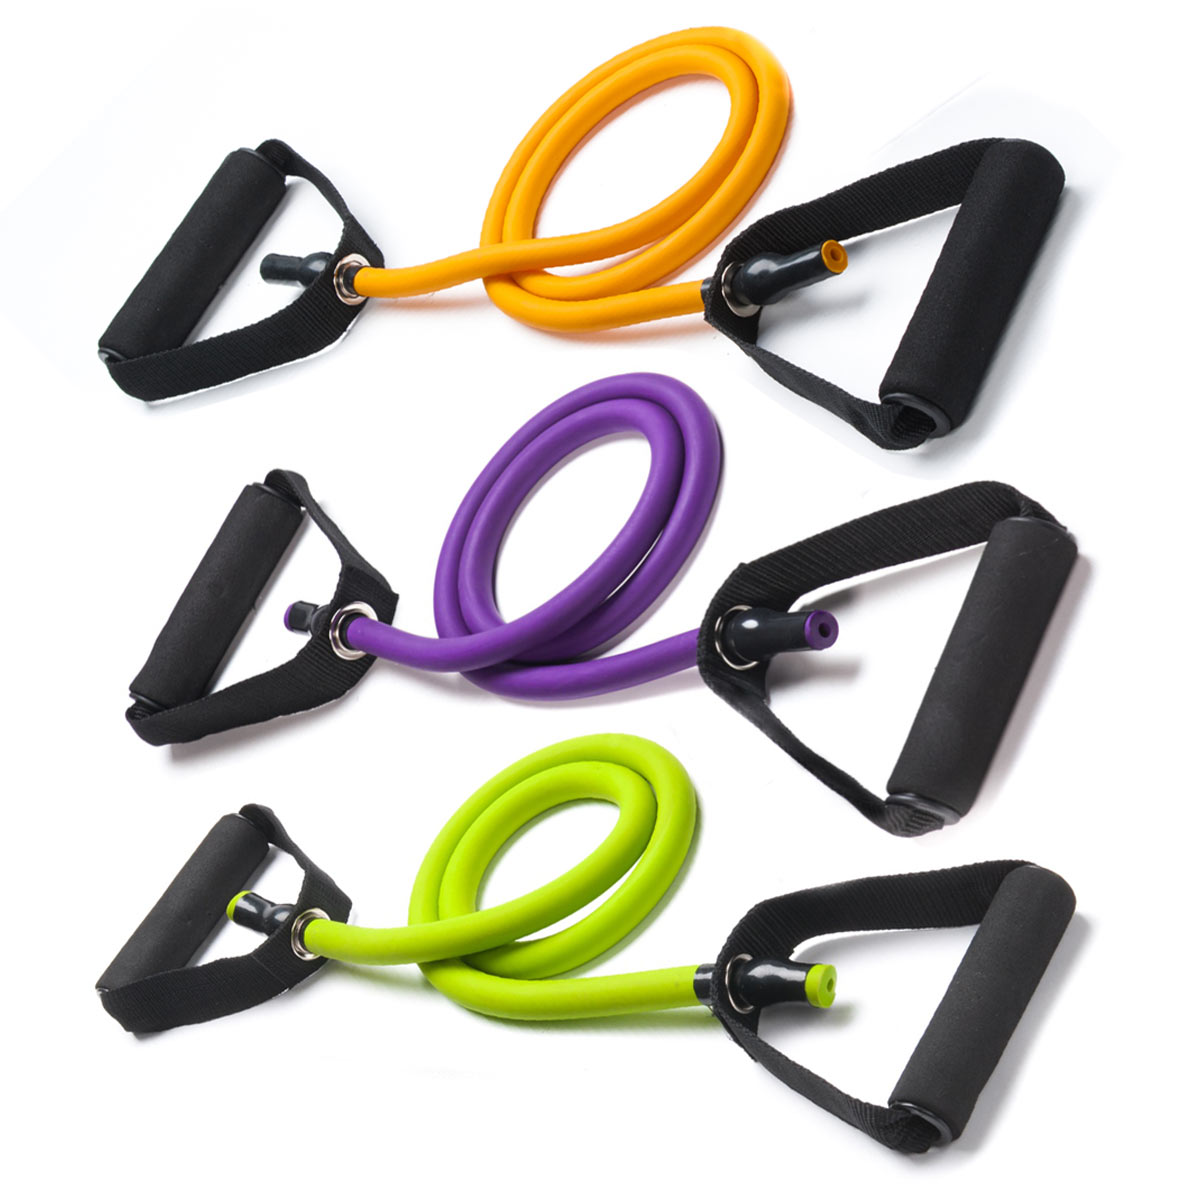 FitWay Equip. Heavy Duty Resistance Band - Black